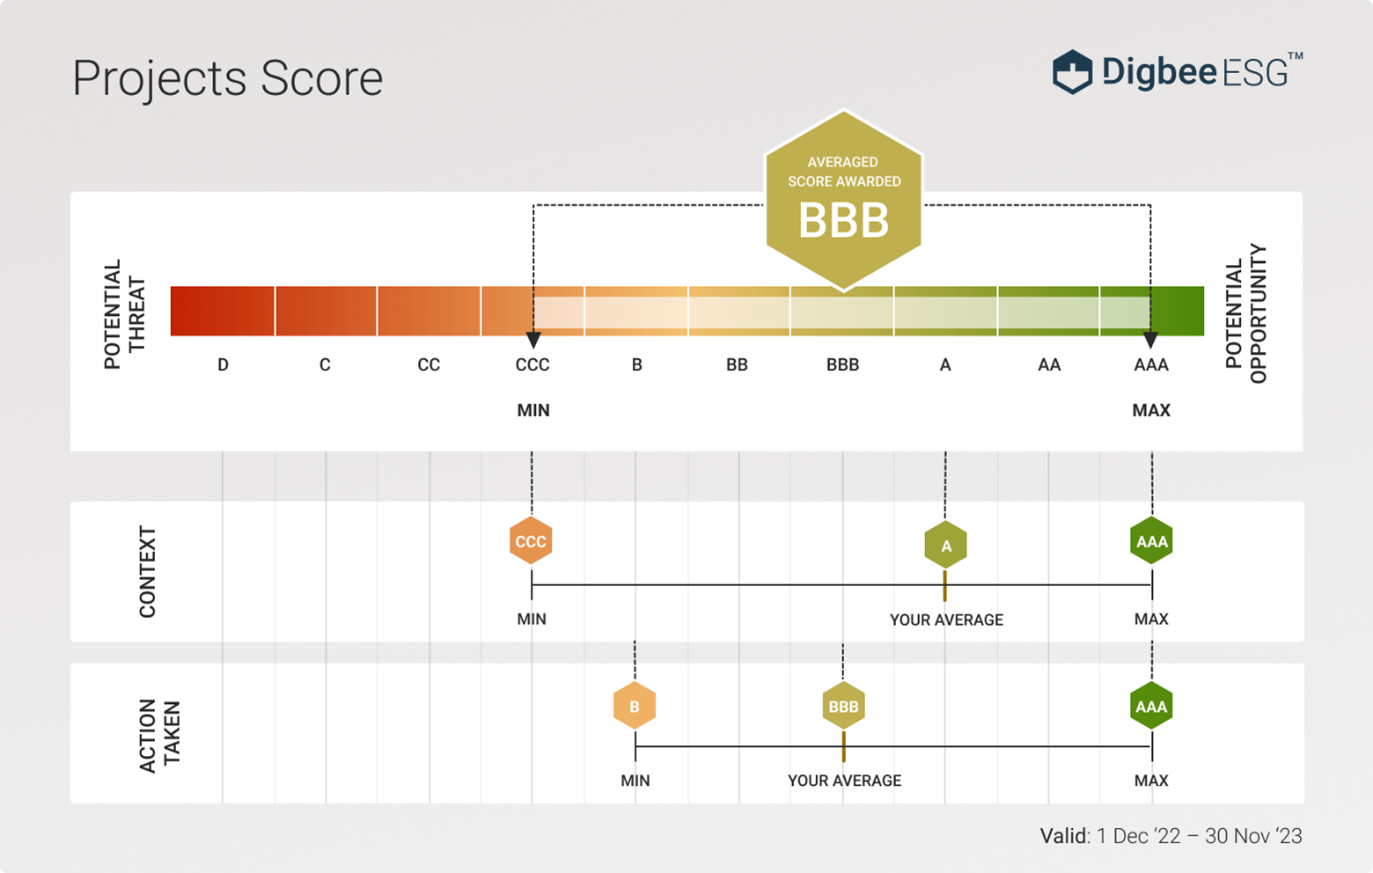 2022 Digbee Assessment Project Score